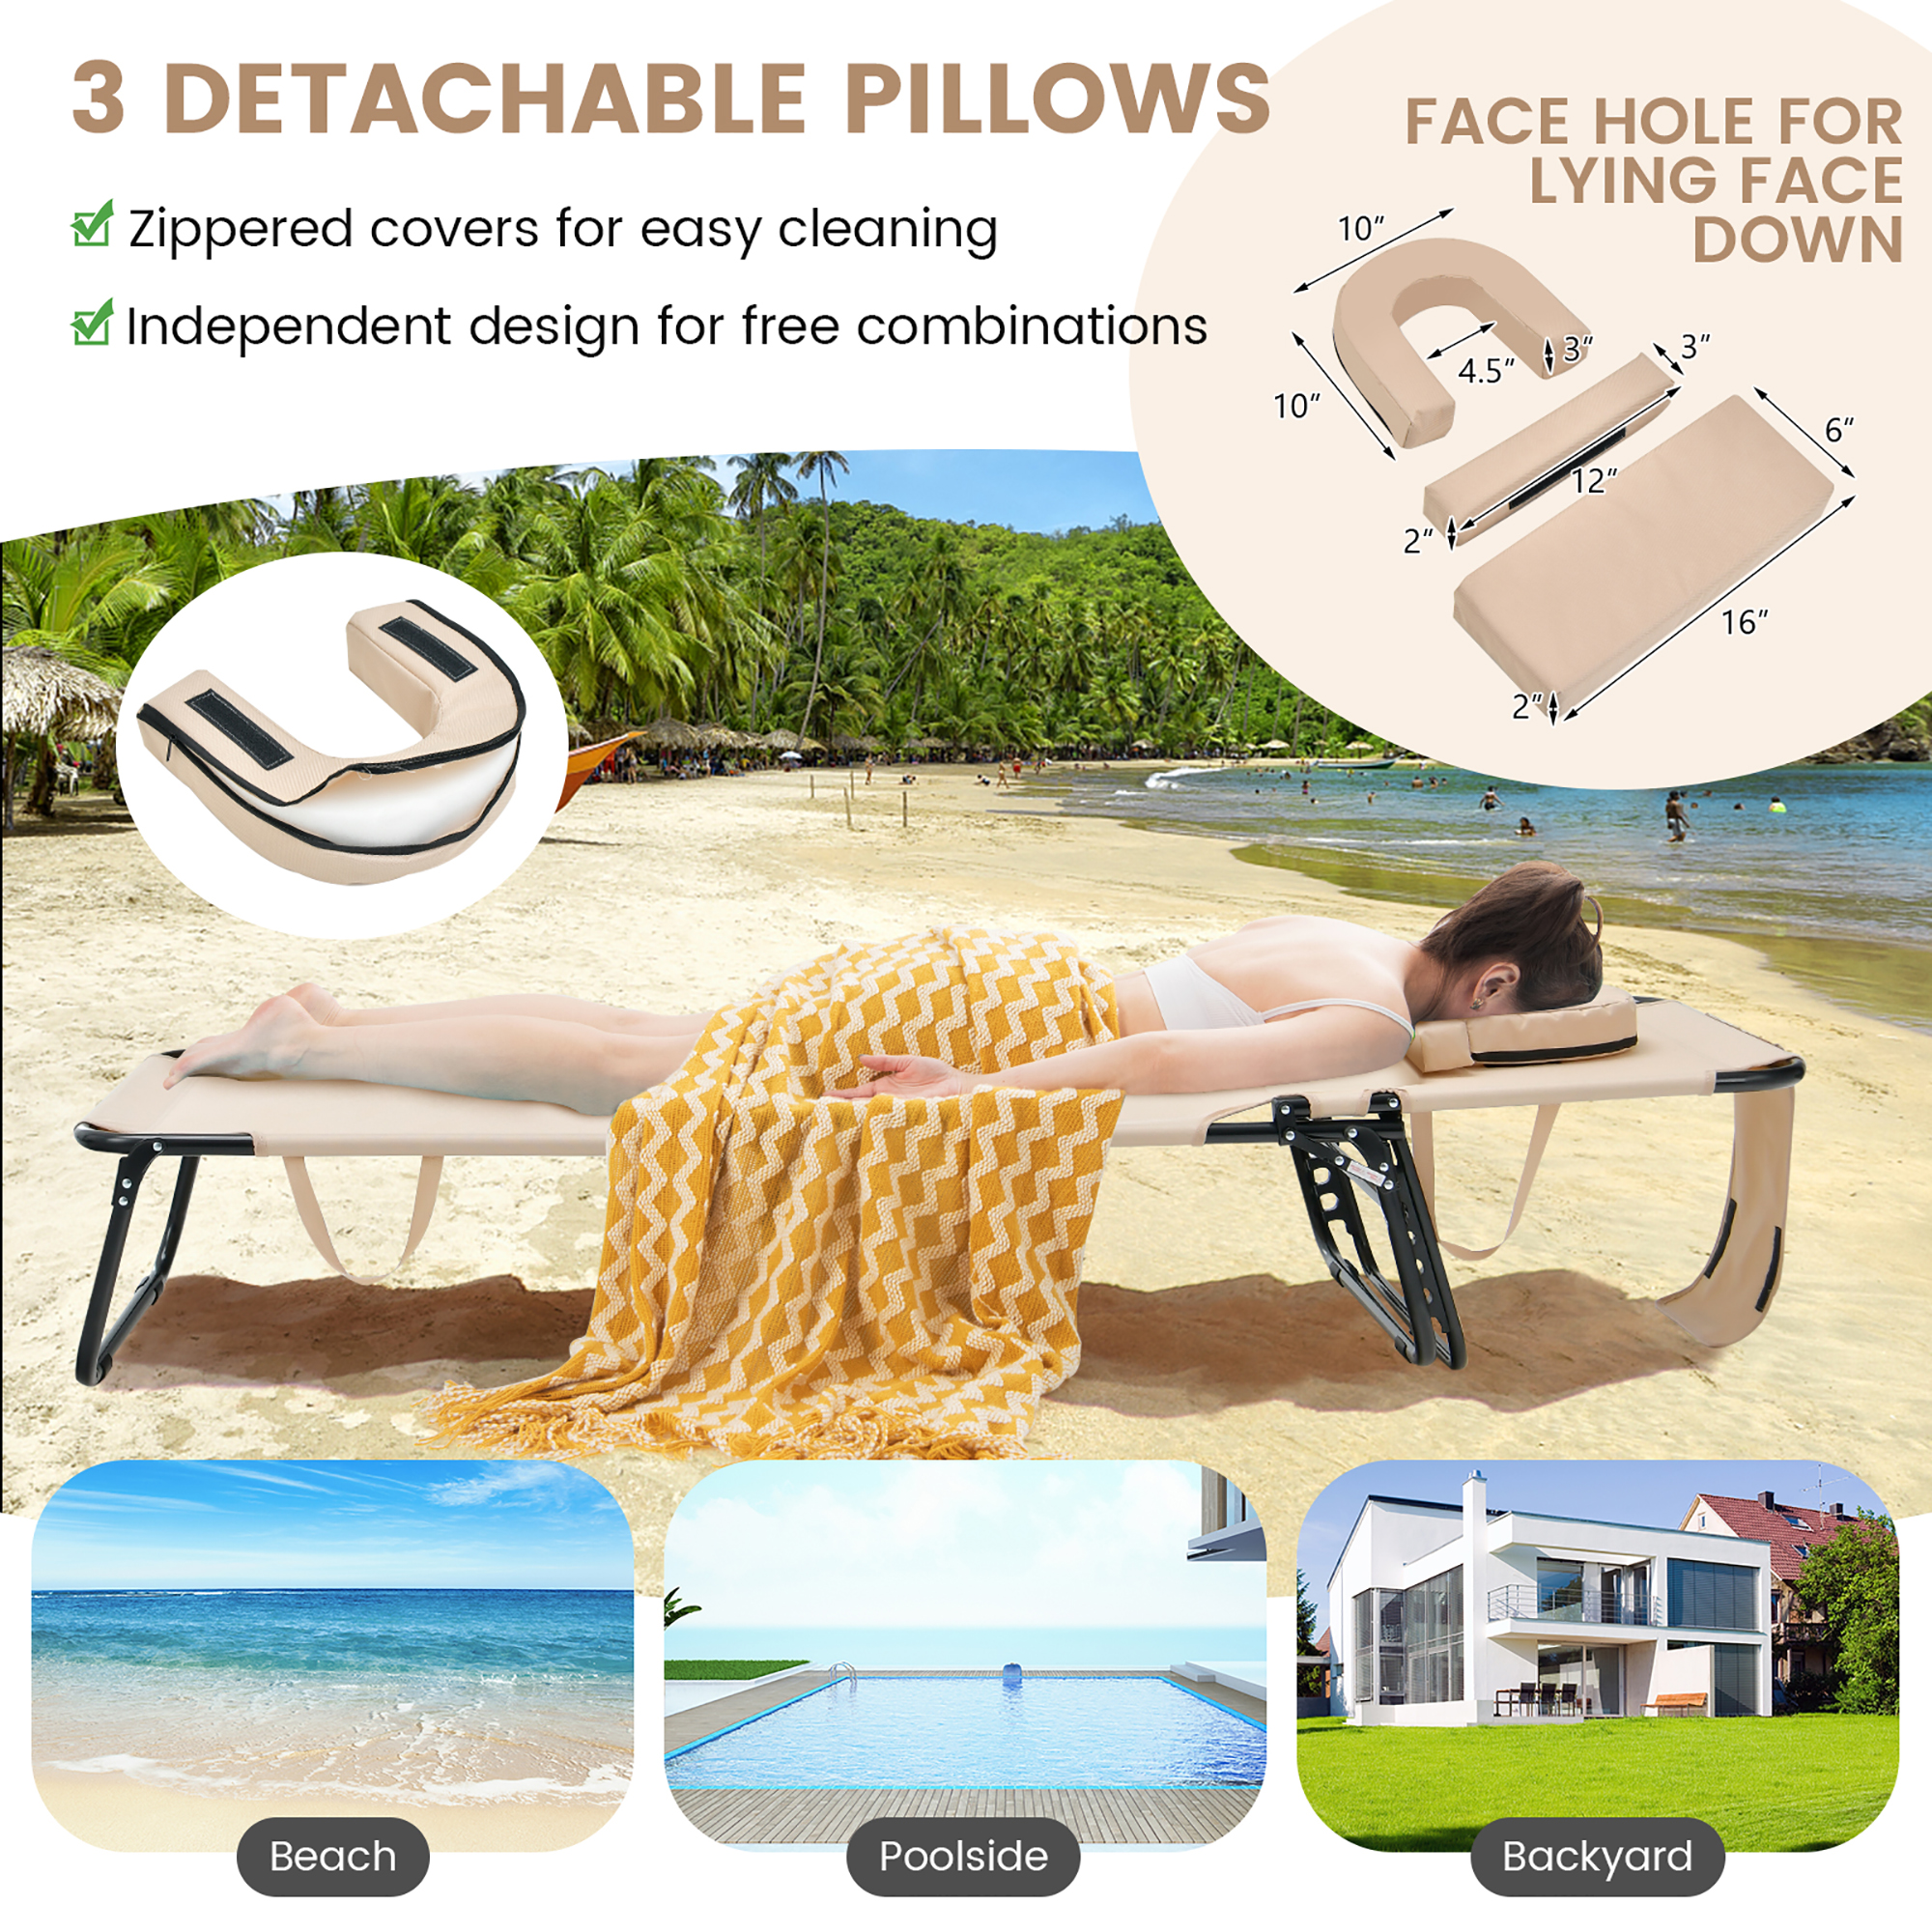 Costway 2 PCS Beach Chaise Lounge Chair with Face Hole Pillows & Adjustable Backrest Beige - image 3 of 10